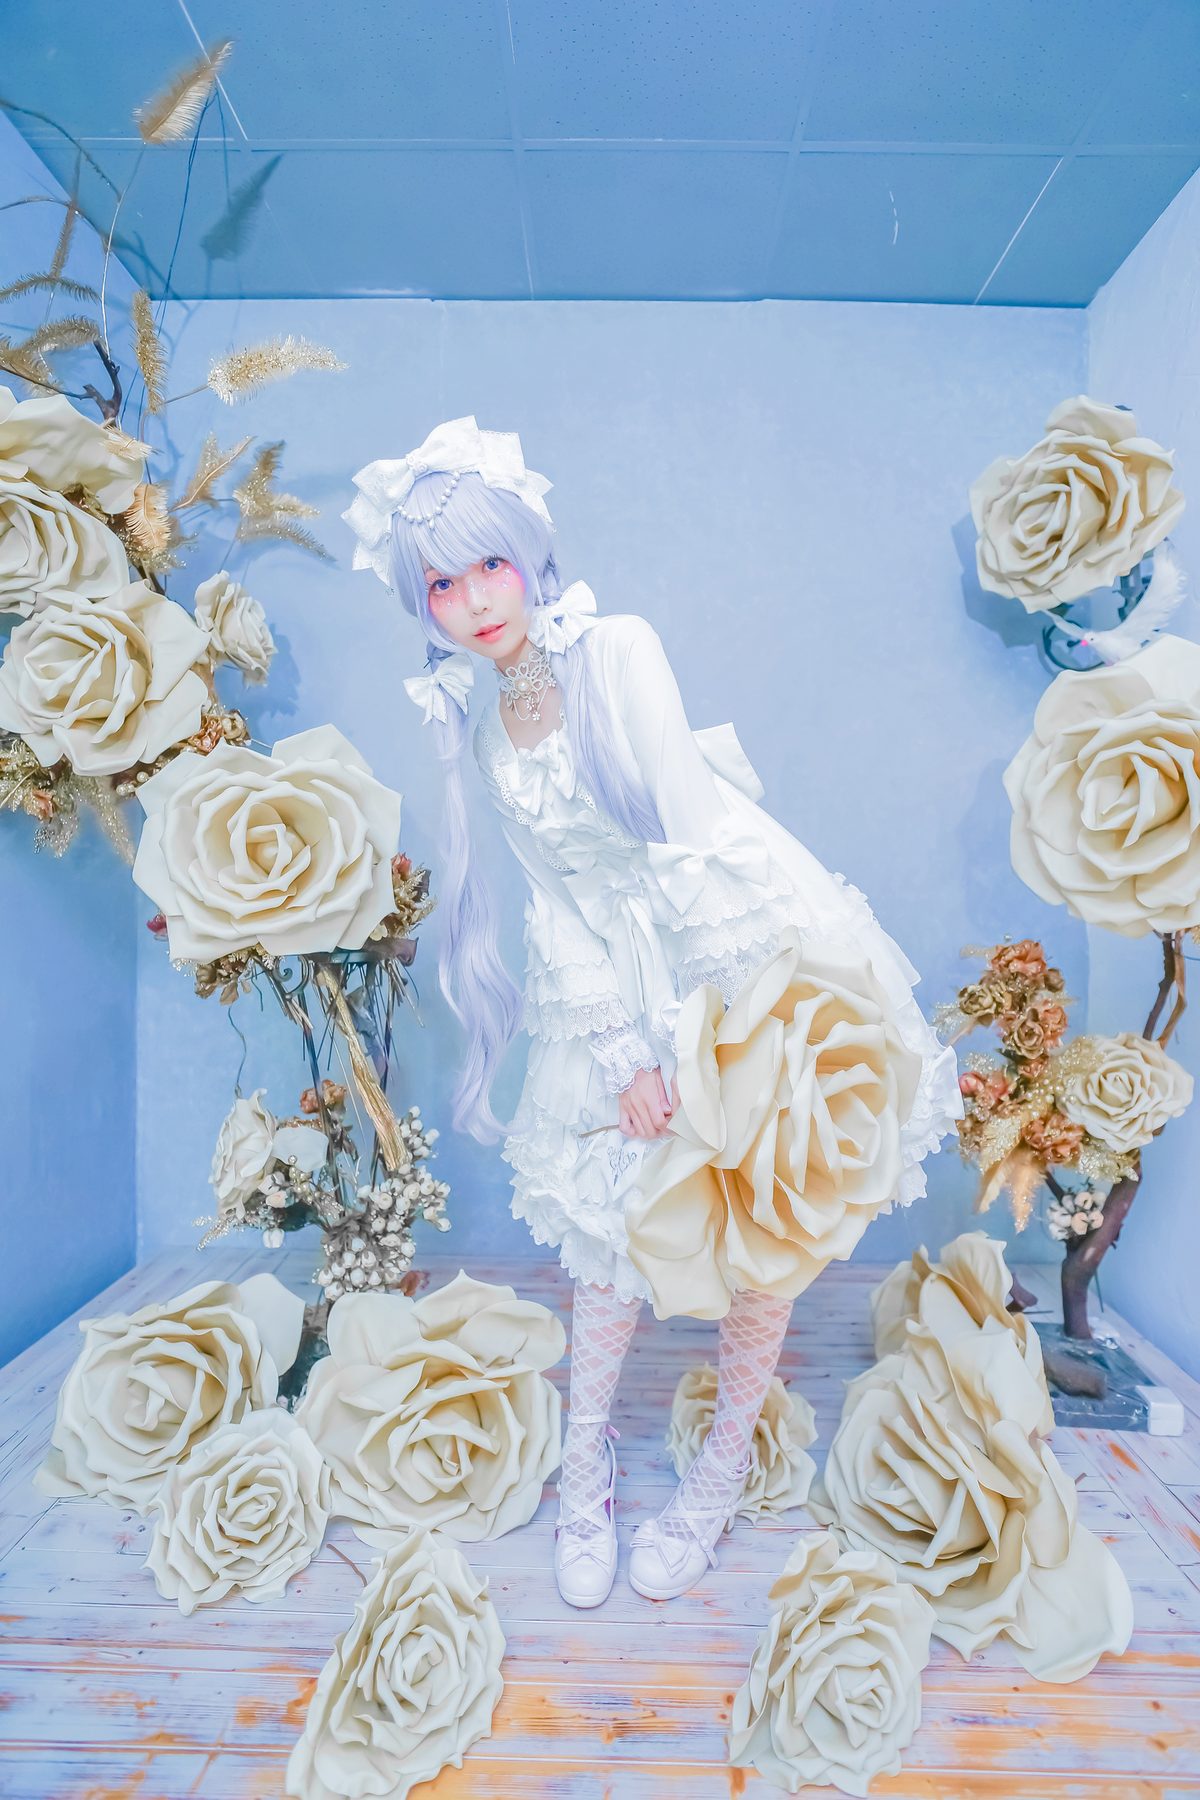 Coser@Ely_eee ElyEE子 TUESDAY TWINTAIL A 0063 4866328809.jpg